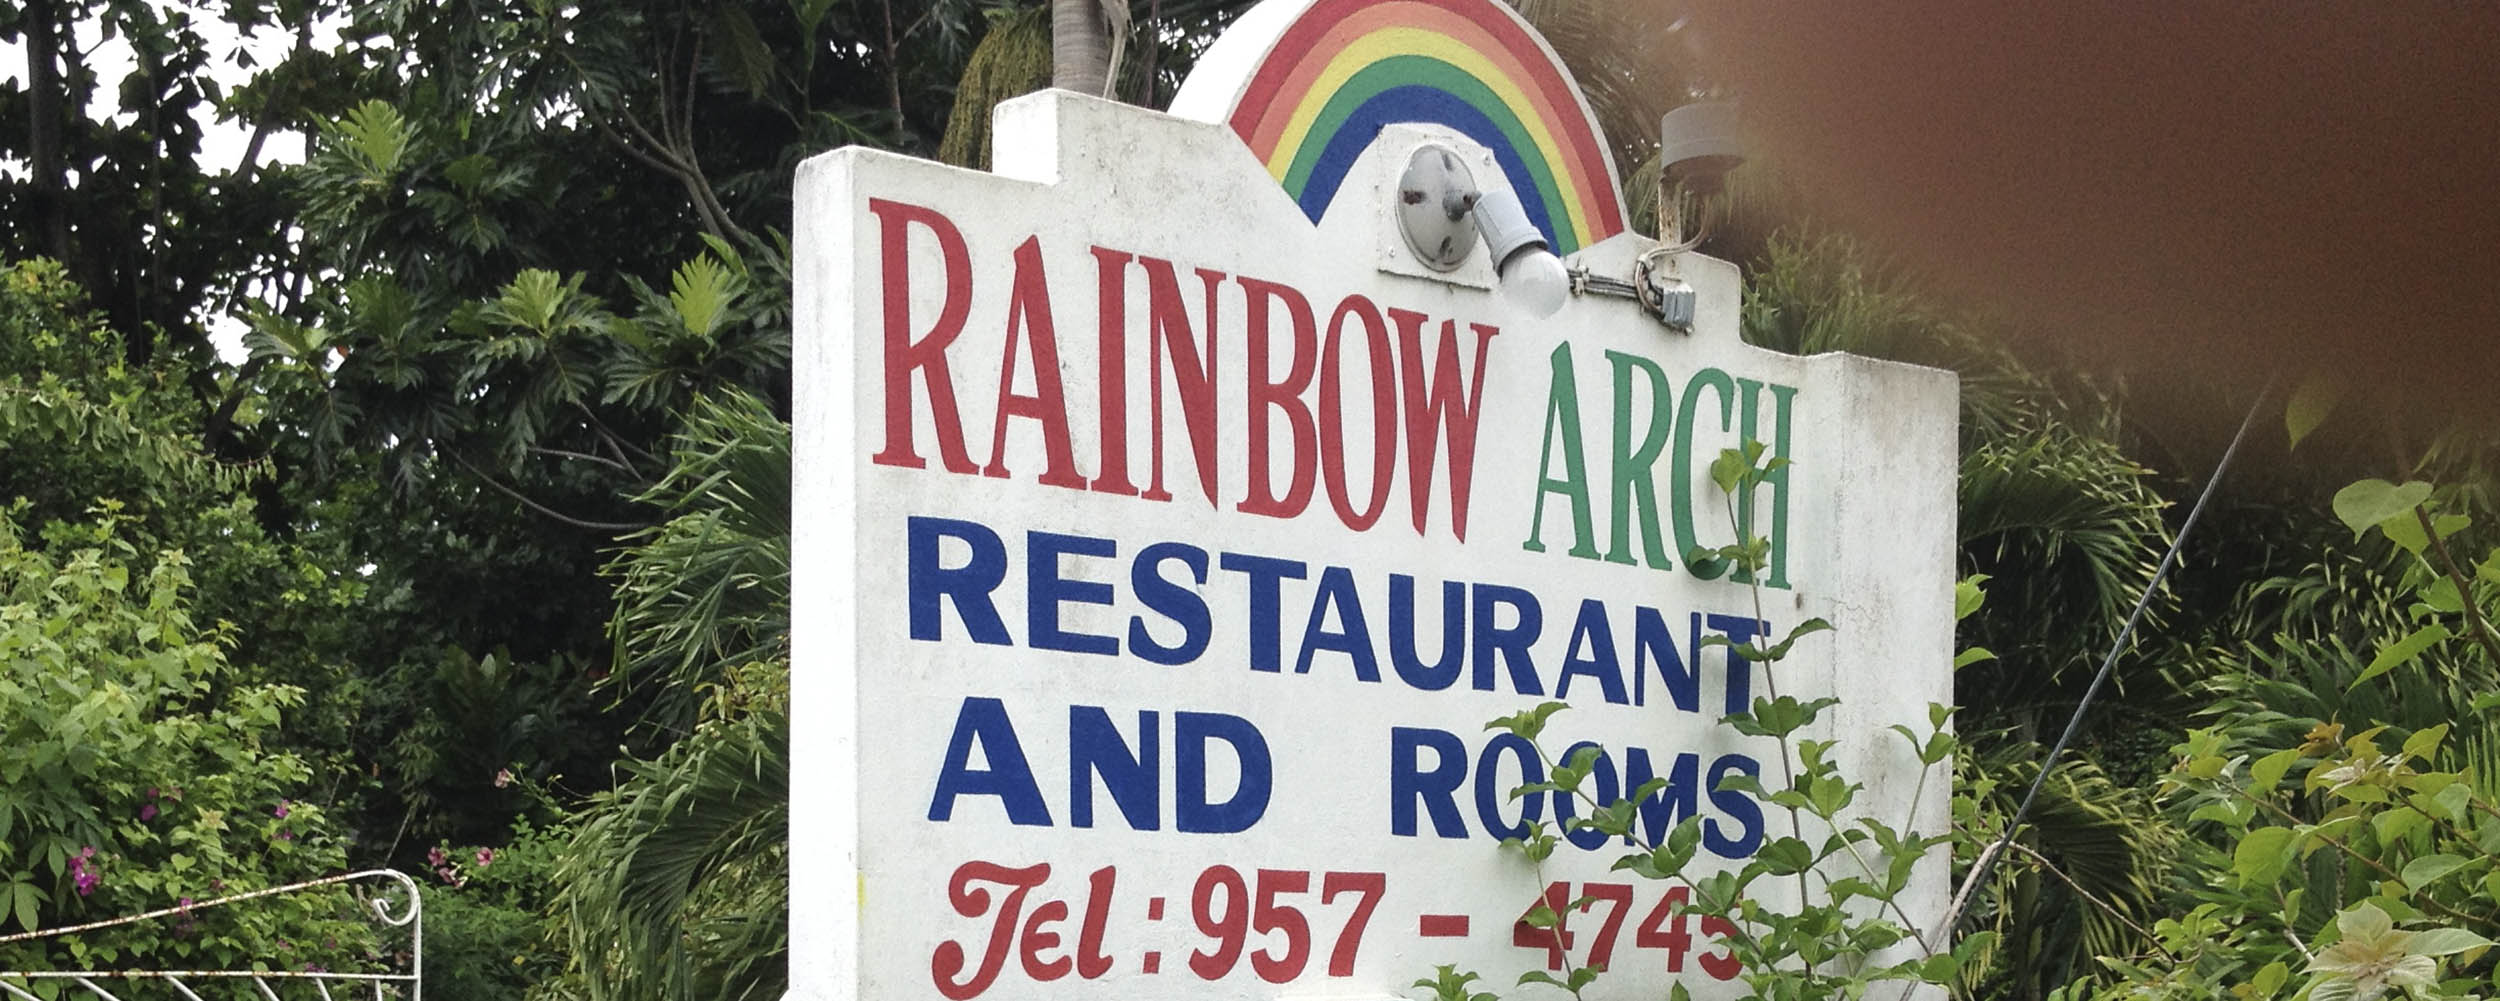 Rainbow Arch Restaurant and Rooms - Negril Jamaica